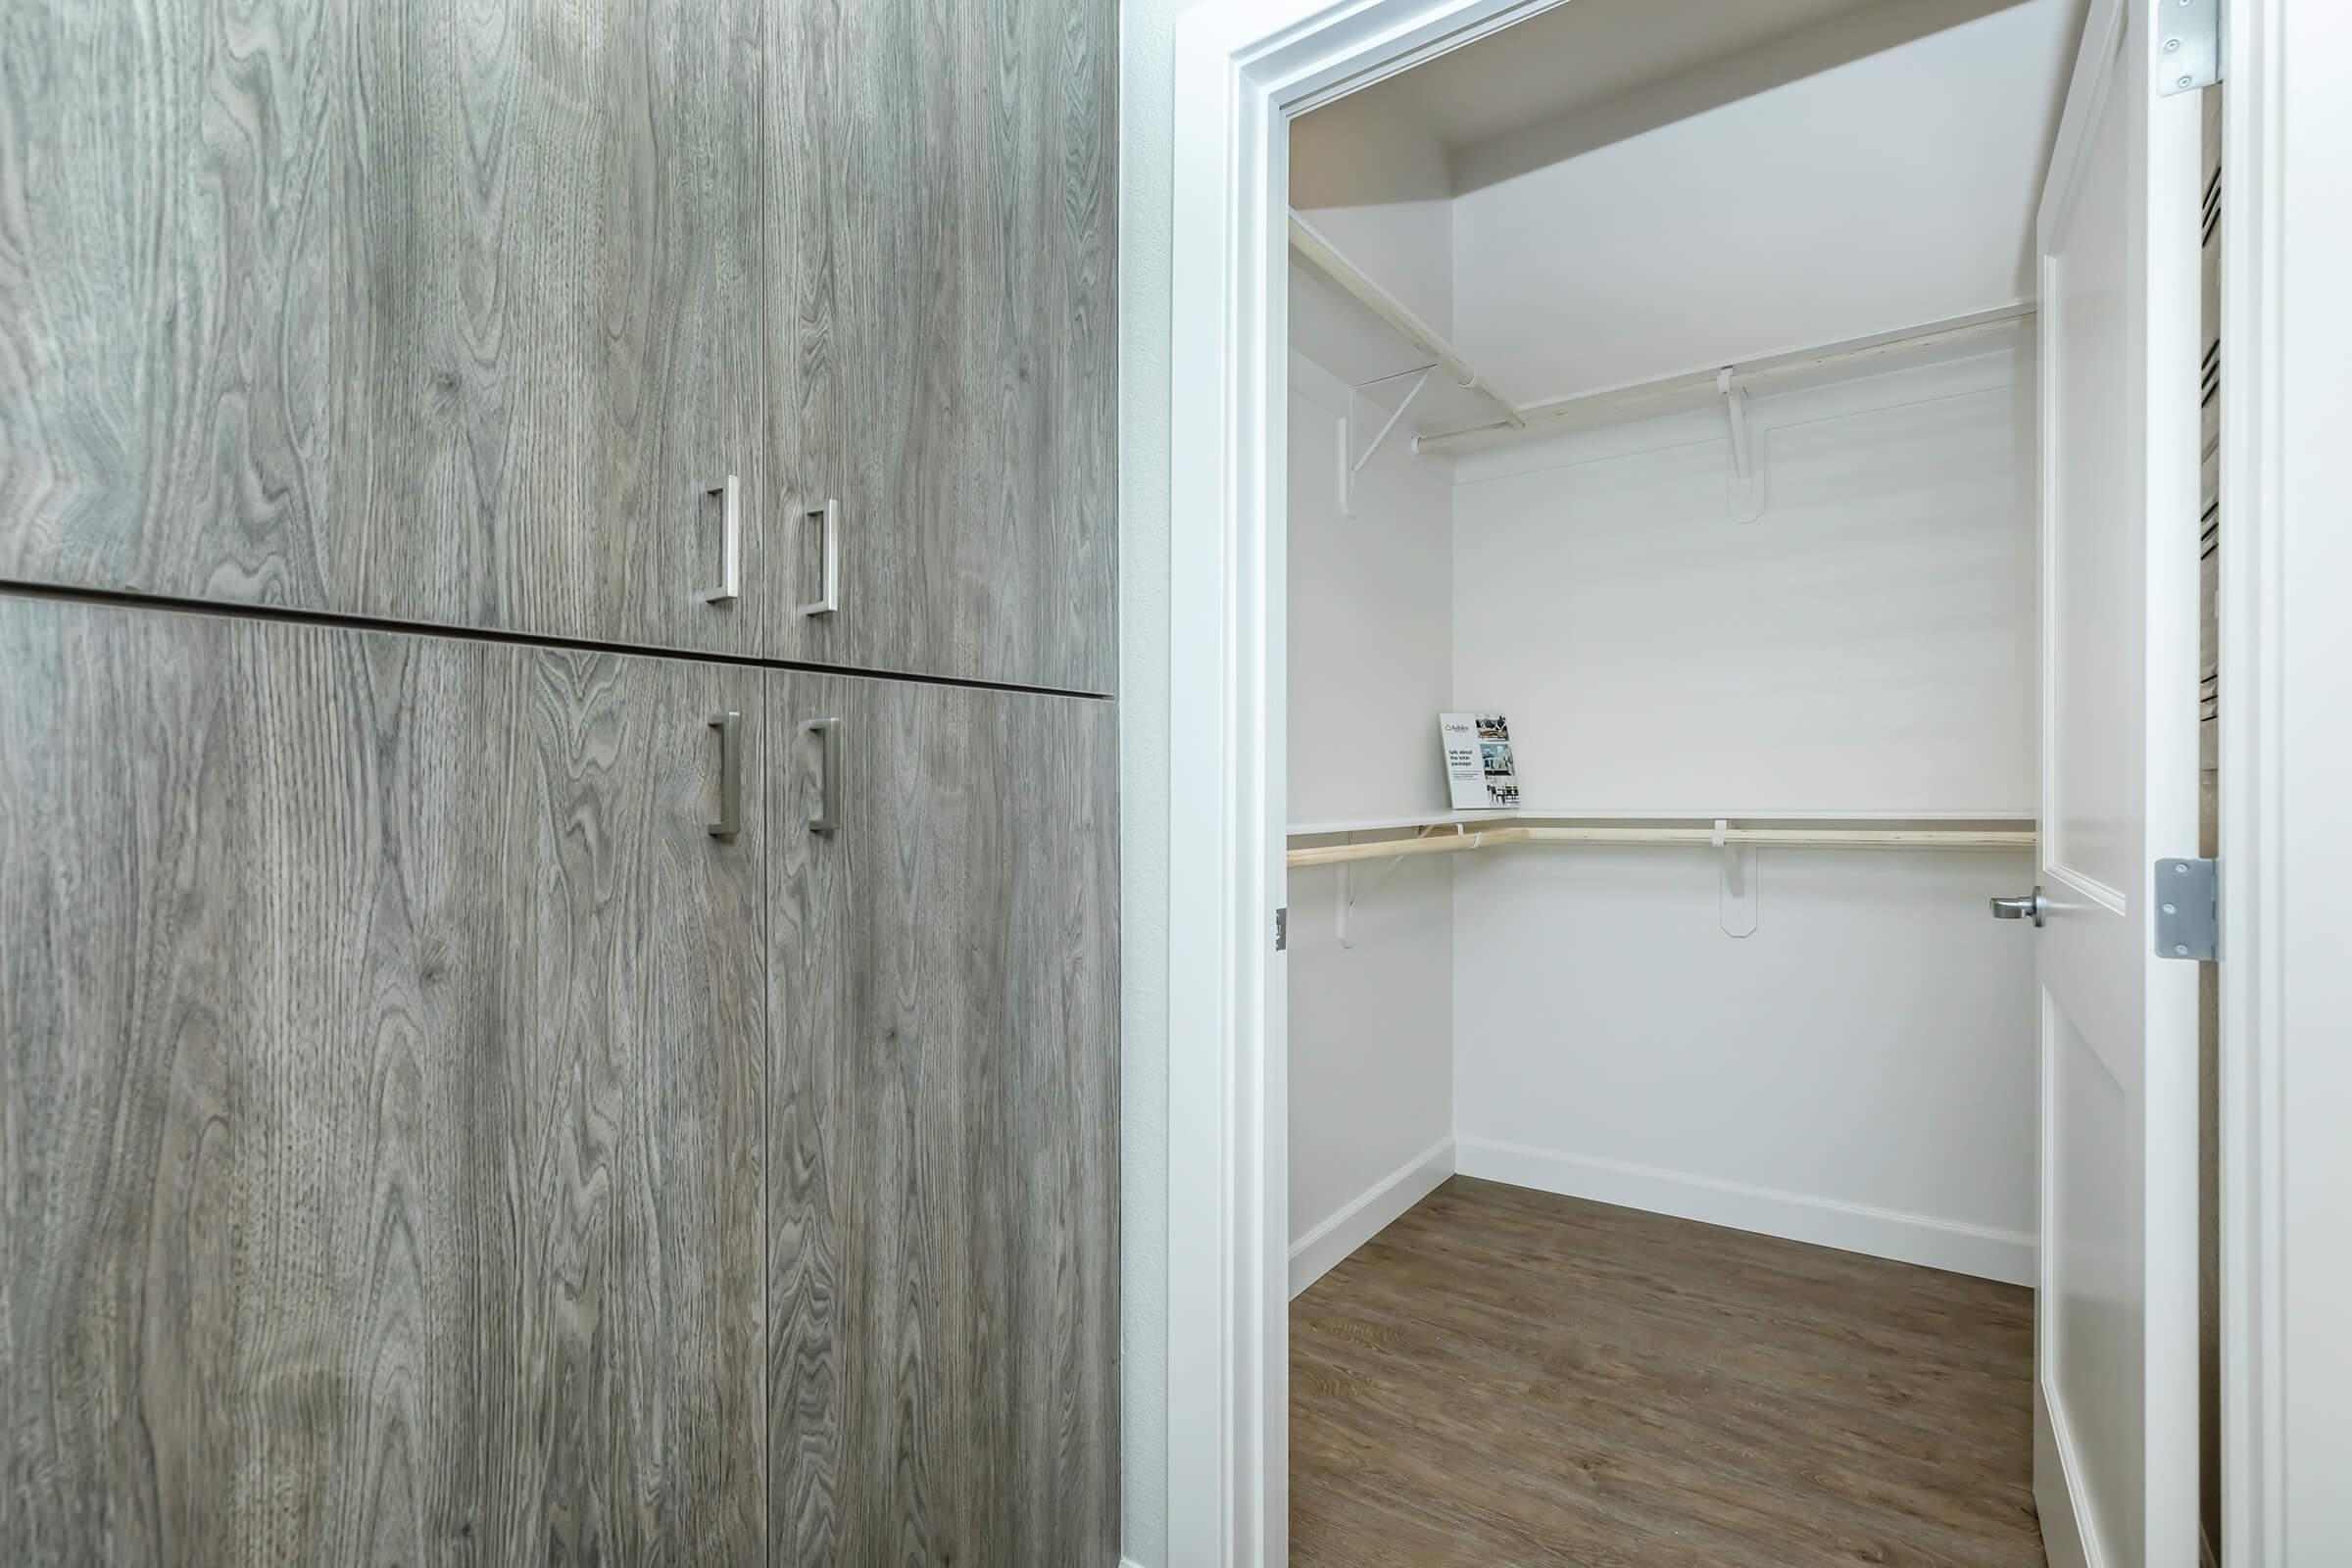 SPACIOUS WALK-IN CLOSETS CAN BE YOURS